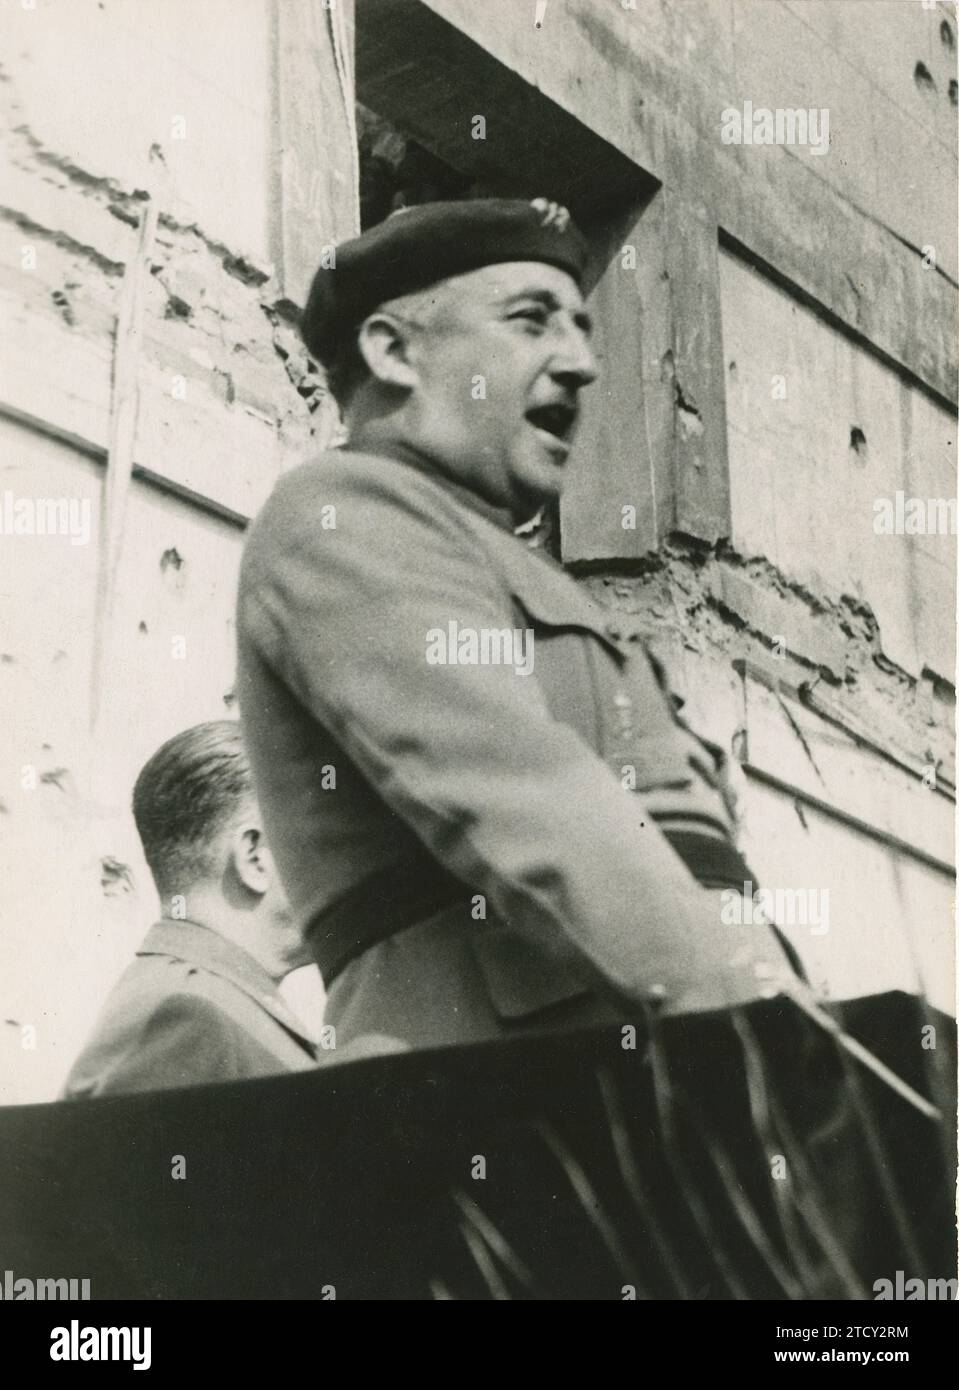 Gijón, 09/18/1939. Spanish Civil War. The Head of State Francisco Franco, giving a speech in the ruins of the Simancas barracks, directed at the heroism of the brave men who succumbed there. Credit: Album / Archivo ABC / Mendia Stock Photo